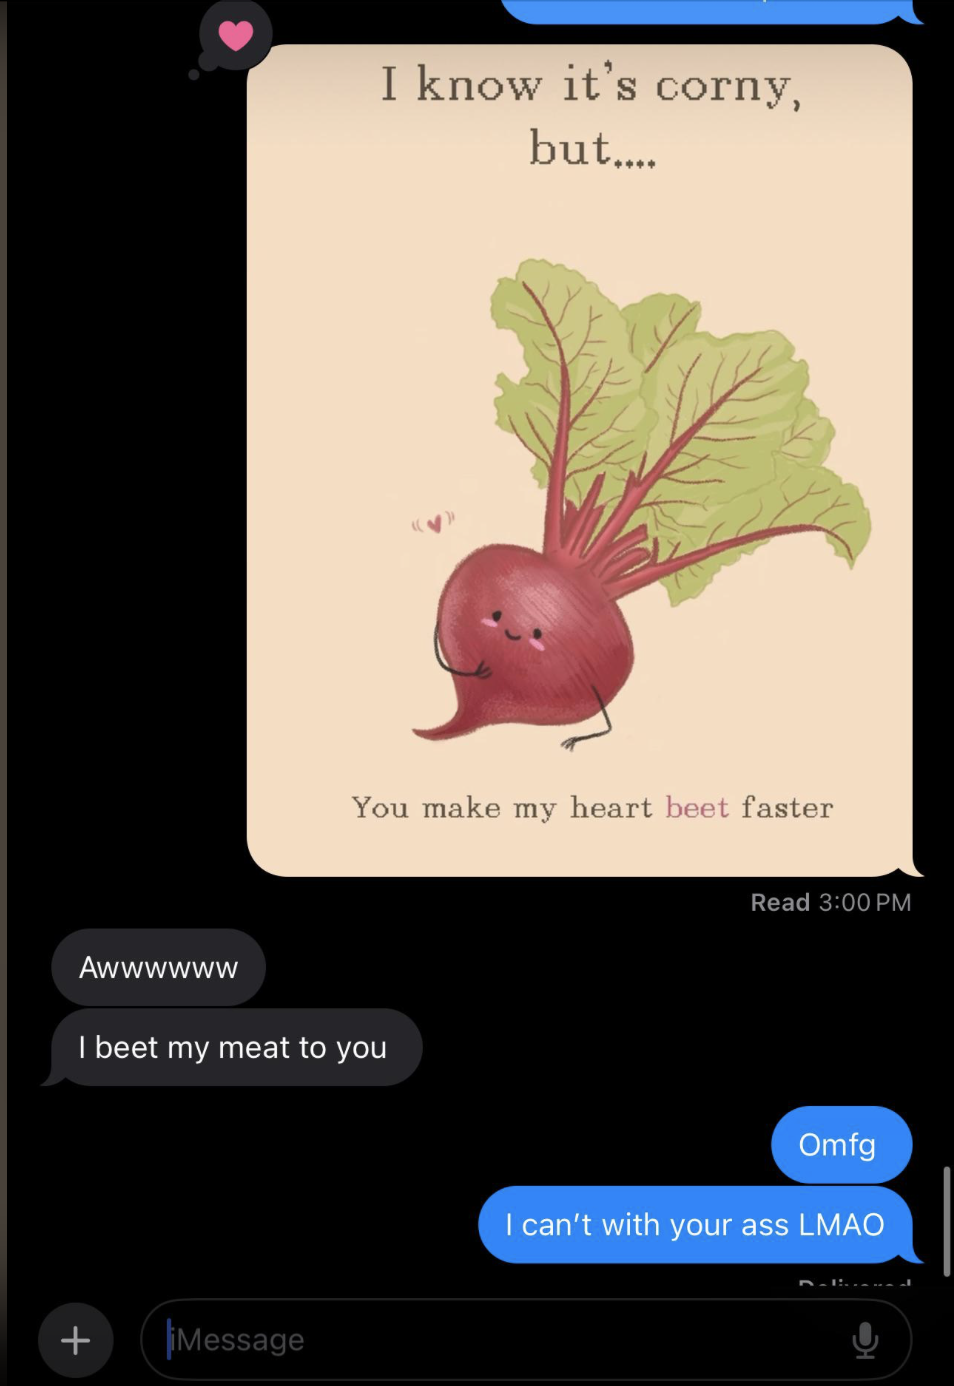 Illustration of a cute beet plant saying &quot;I know it&#x27;s corny, but... You make my heart beet faster.&quot; Text conversation below includes messages reading: &quot;Awwwww,&quot; &quot;I beet my meat to you,&quot; &quot;Omfg,&quot; and &quot;I can&#x27;t with your ass LMAO.&quot;